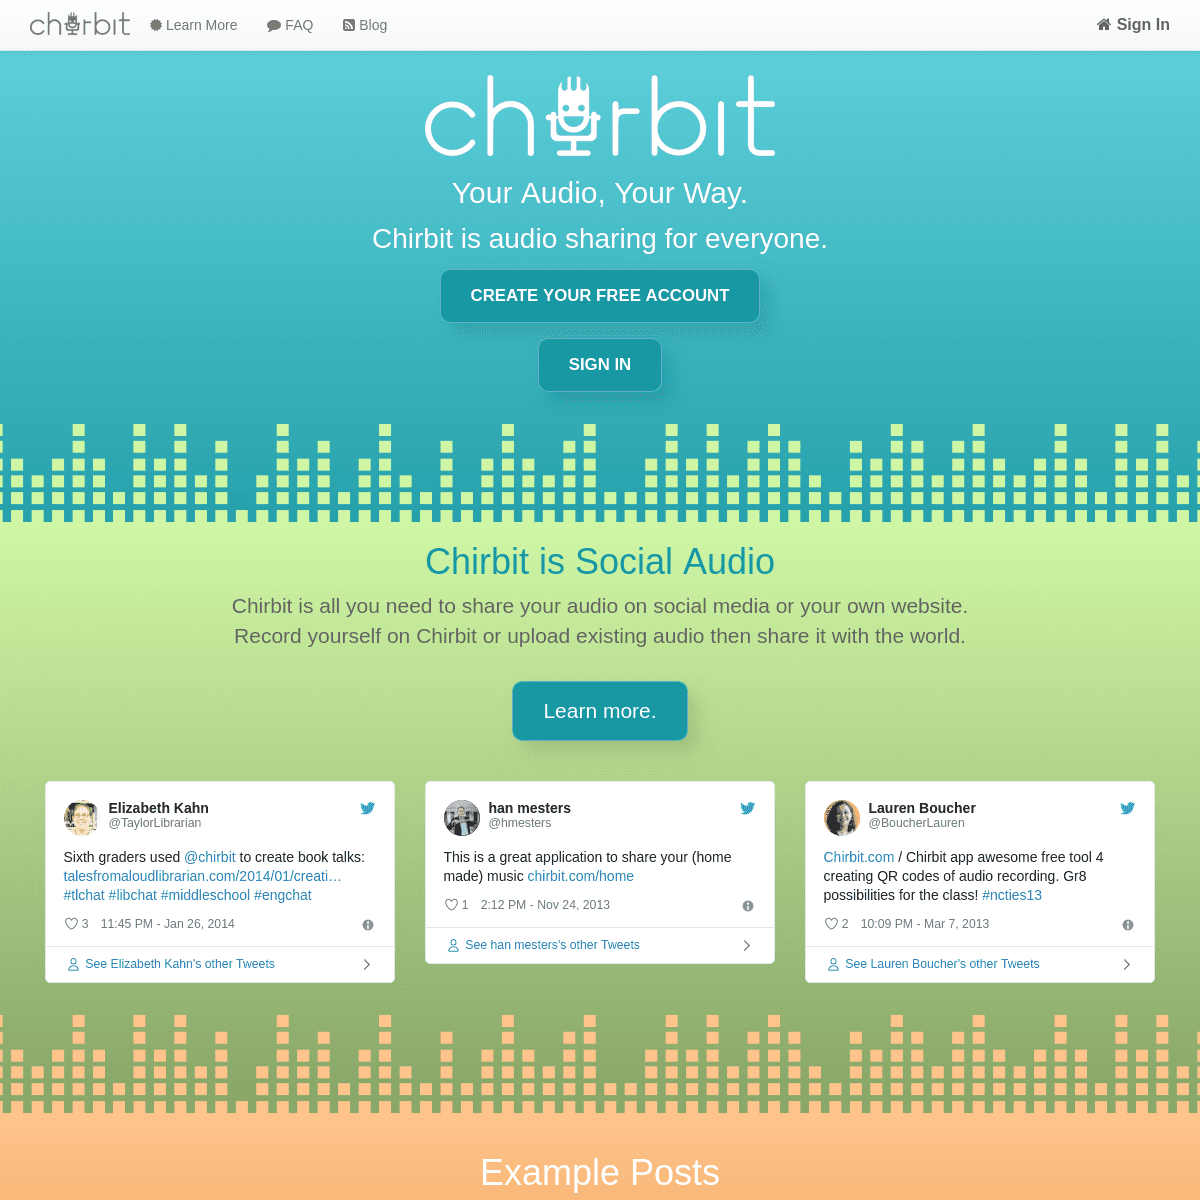 A complete backup of chirbit.com